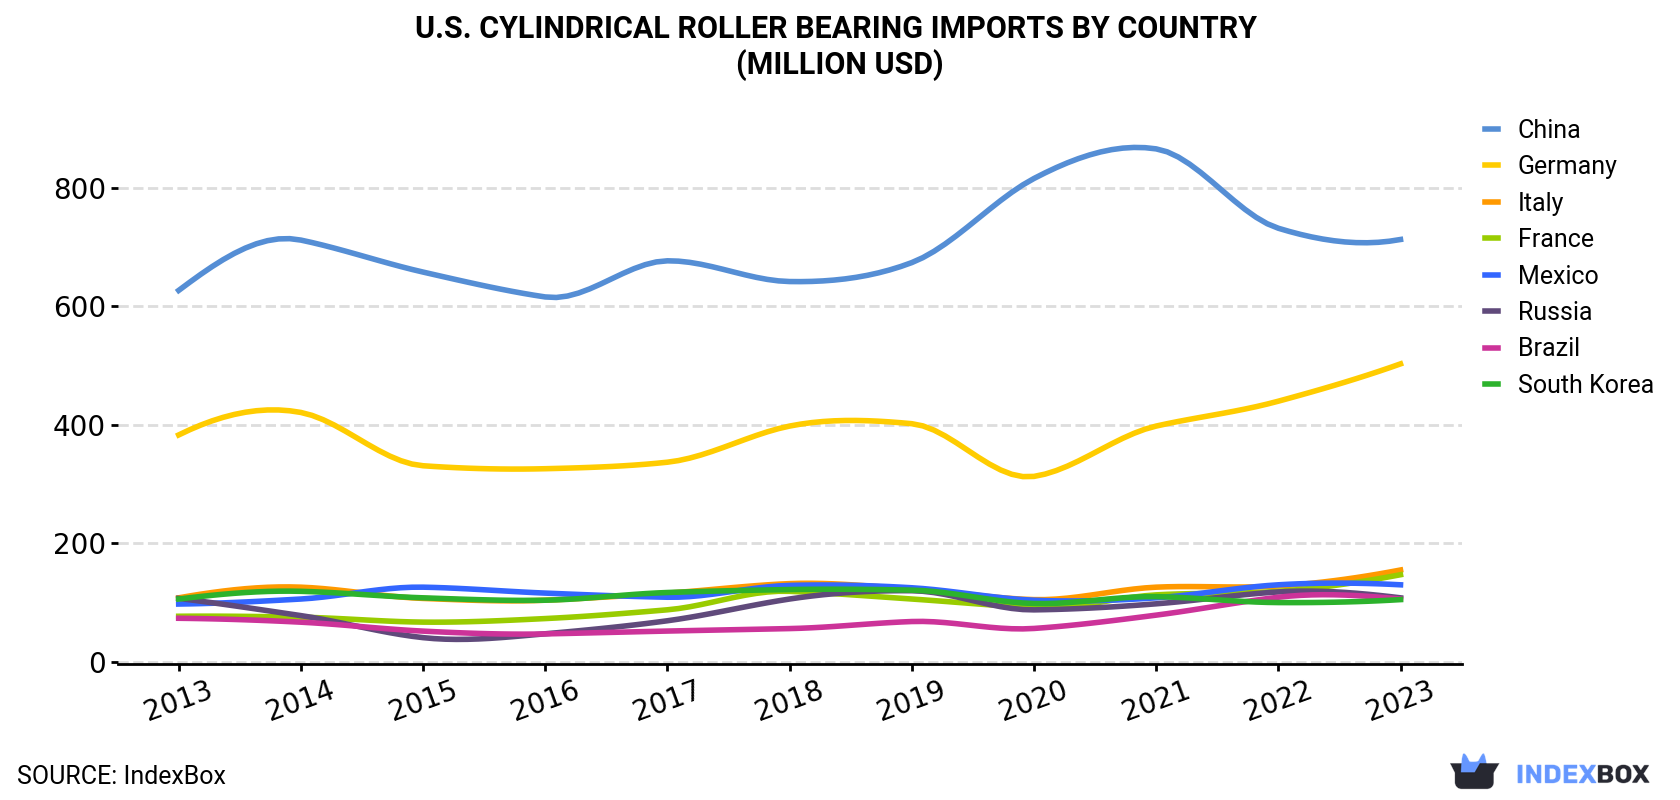 U.S. Cylindrical Roller Bearing Imports By Country (Million USD)